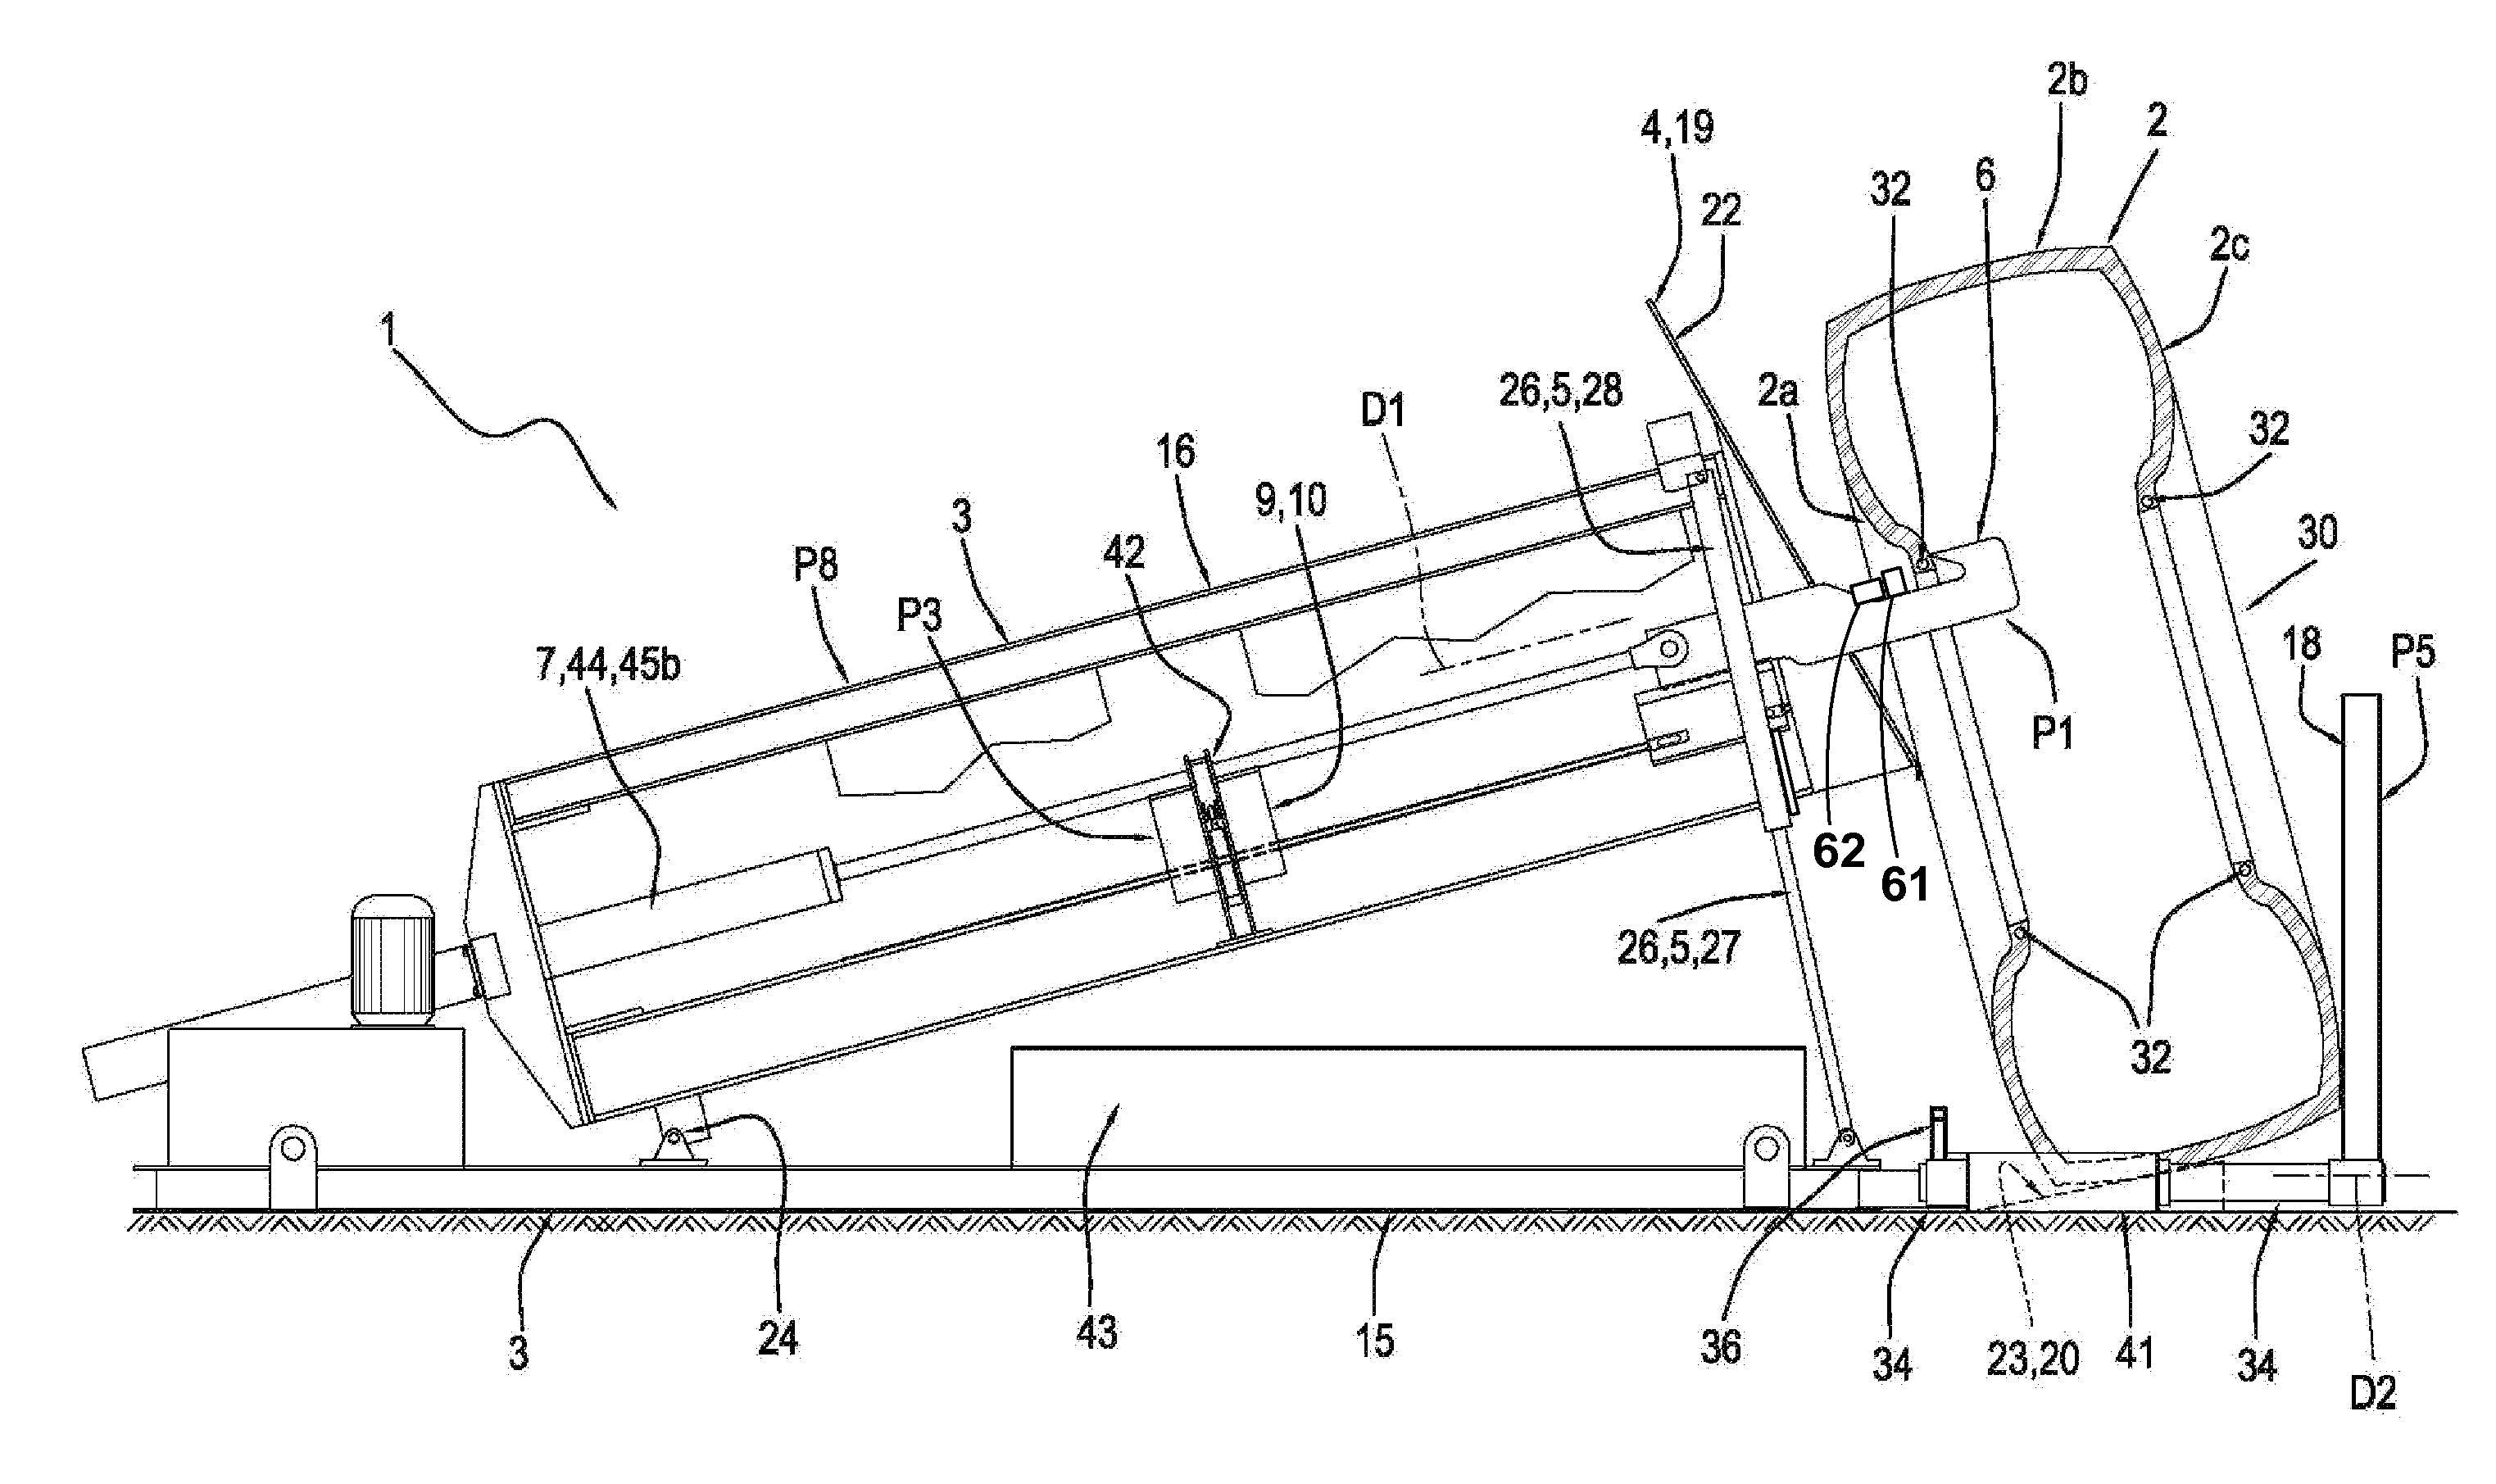 Machine and method for removing beads from tires at the end of life